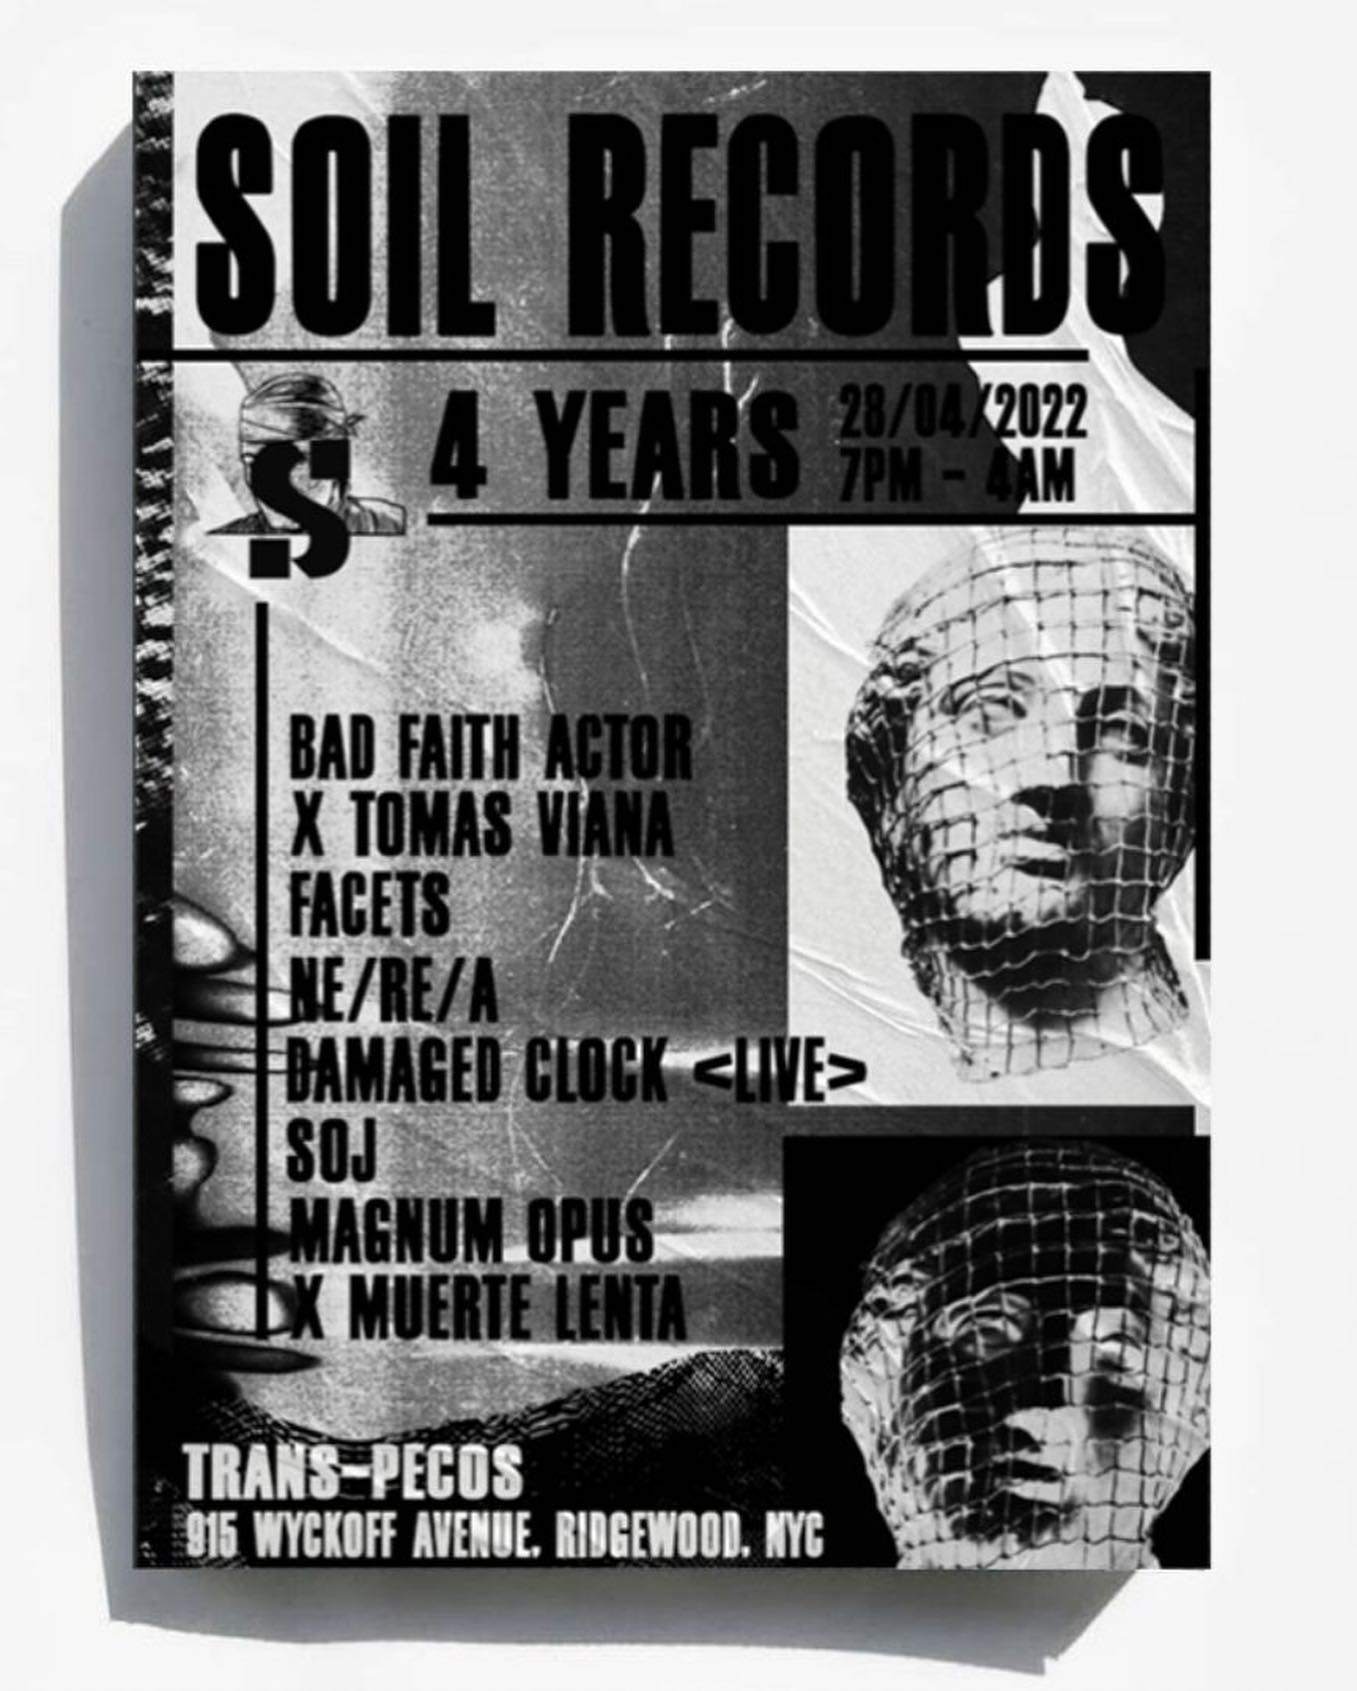 4 Years Soil Records - フライヤー表